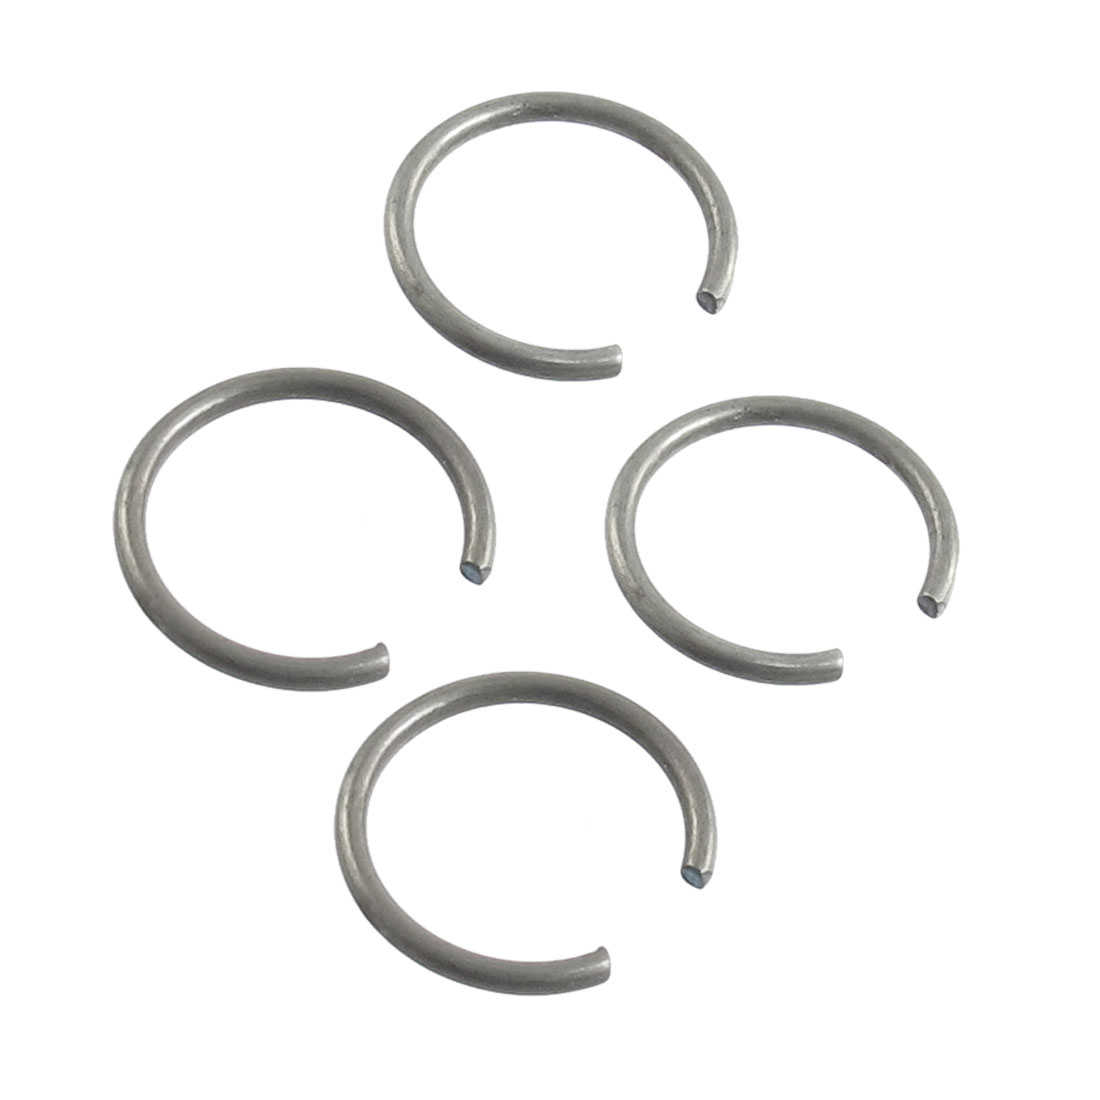 Unique Bargains 5 x Replacements Retaining Ring Gray for FF03-26 Electric Hammer